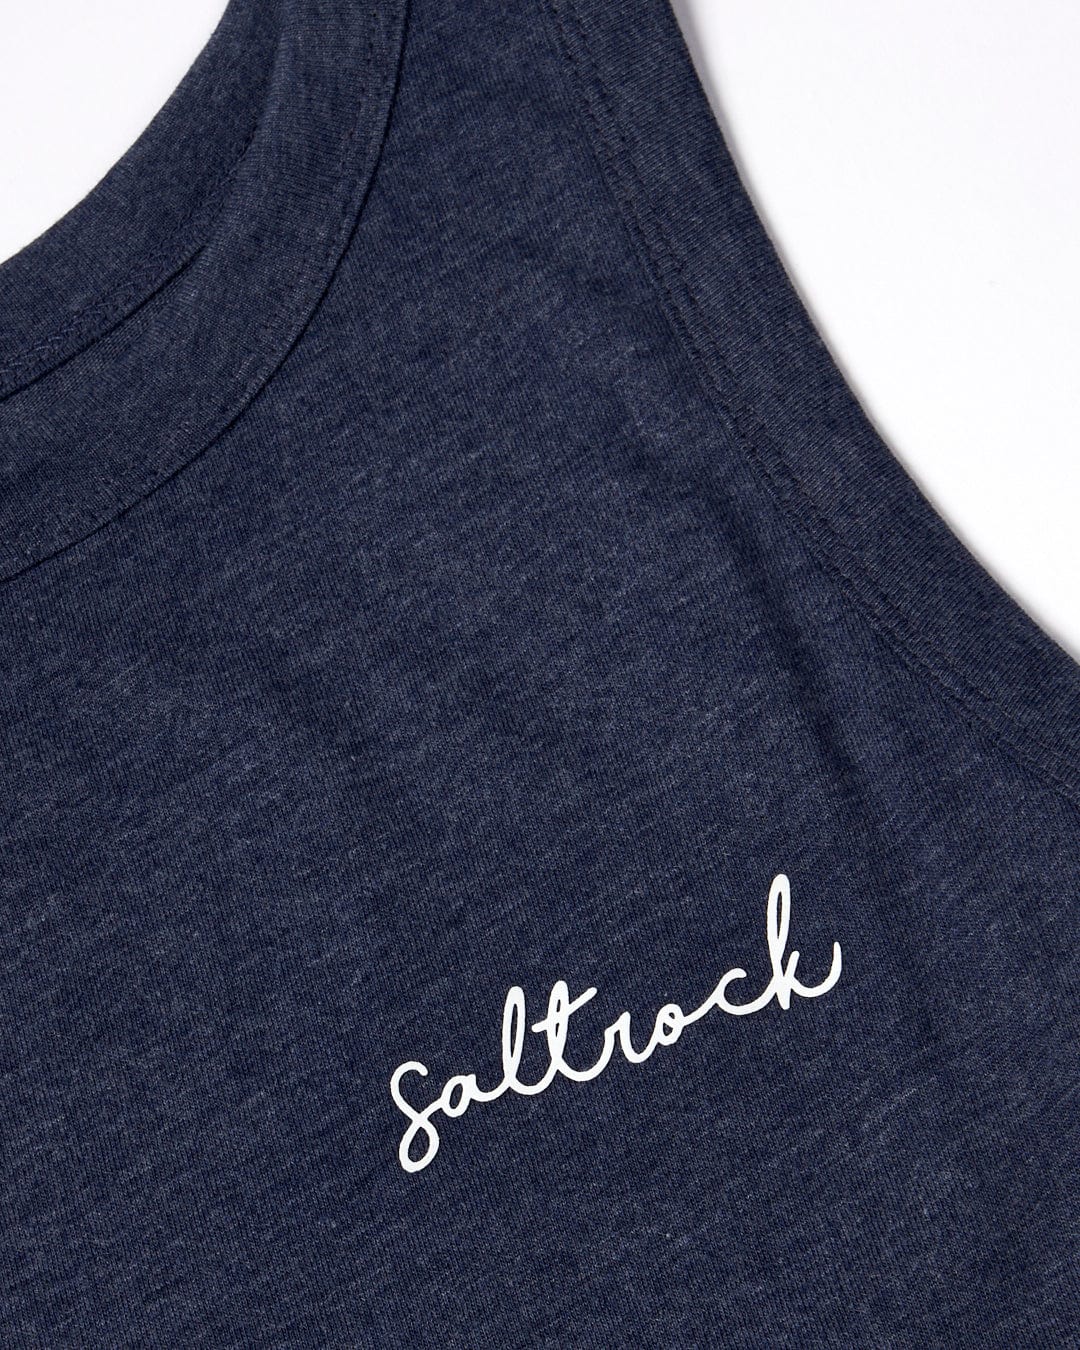 Close-up of a dark blue Velator tank top with a white woven label "Saltrock" on the chest.